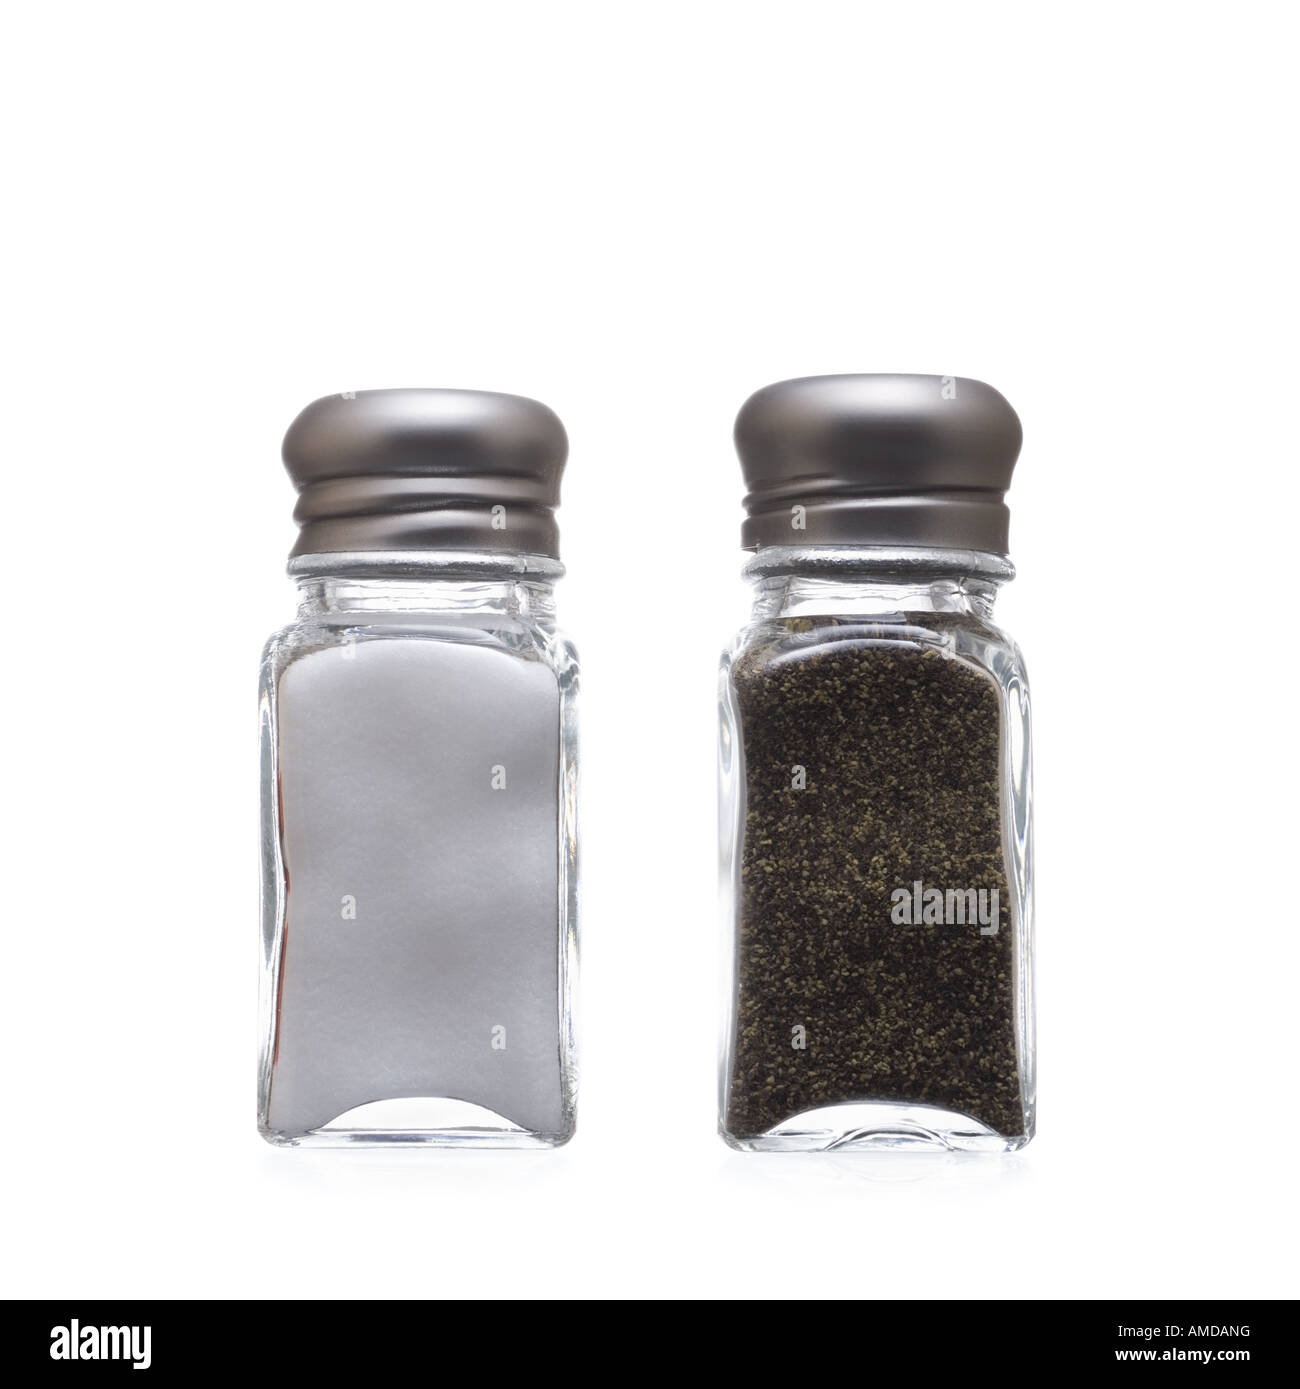 Salt and pepper shakers Stock Photo